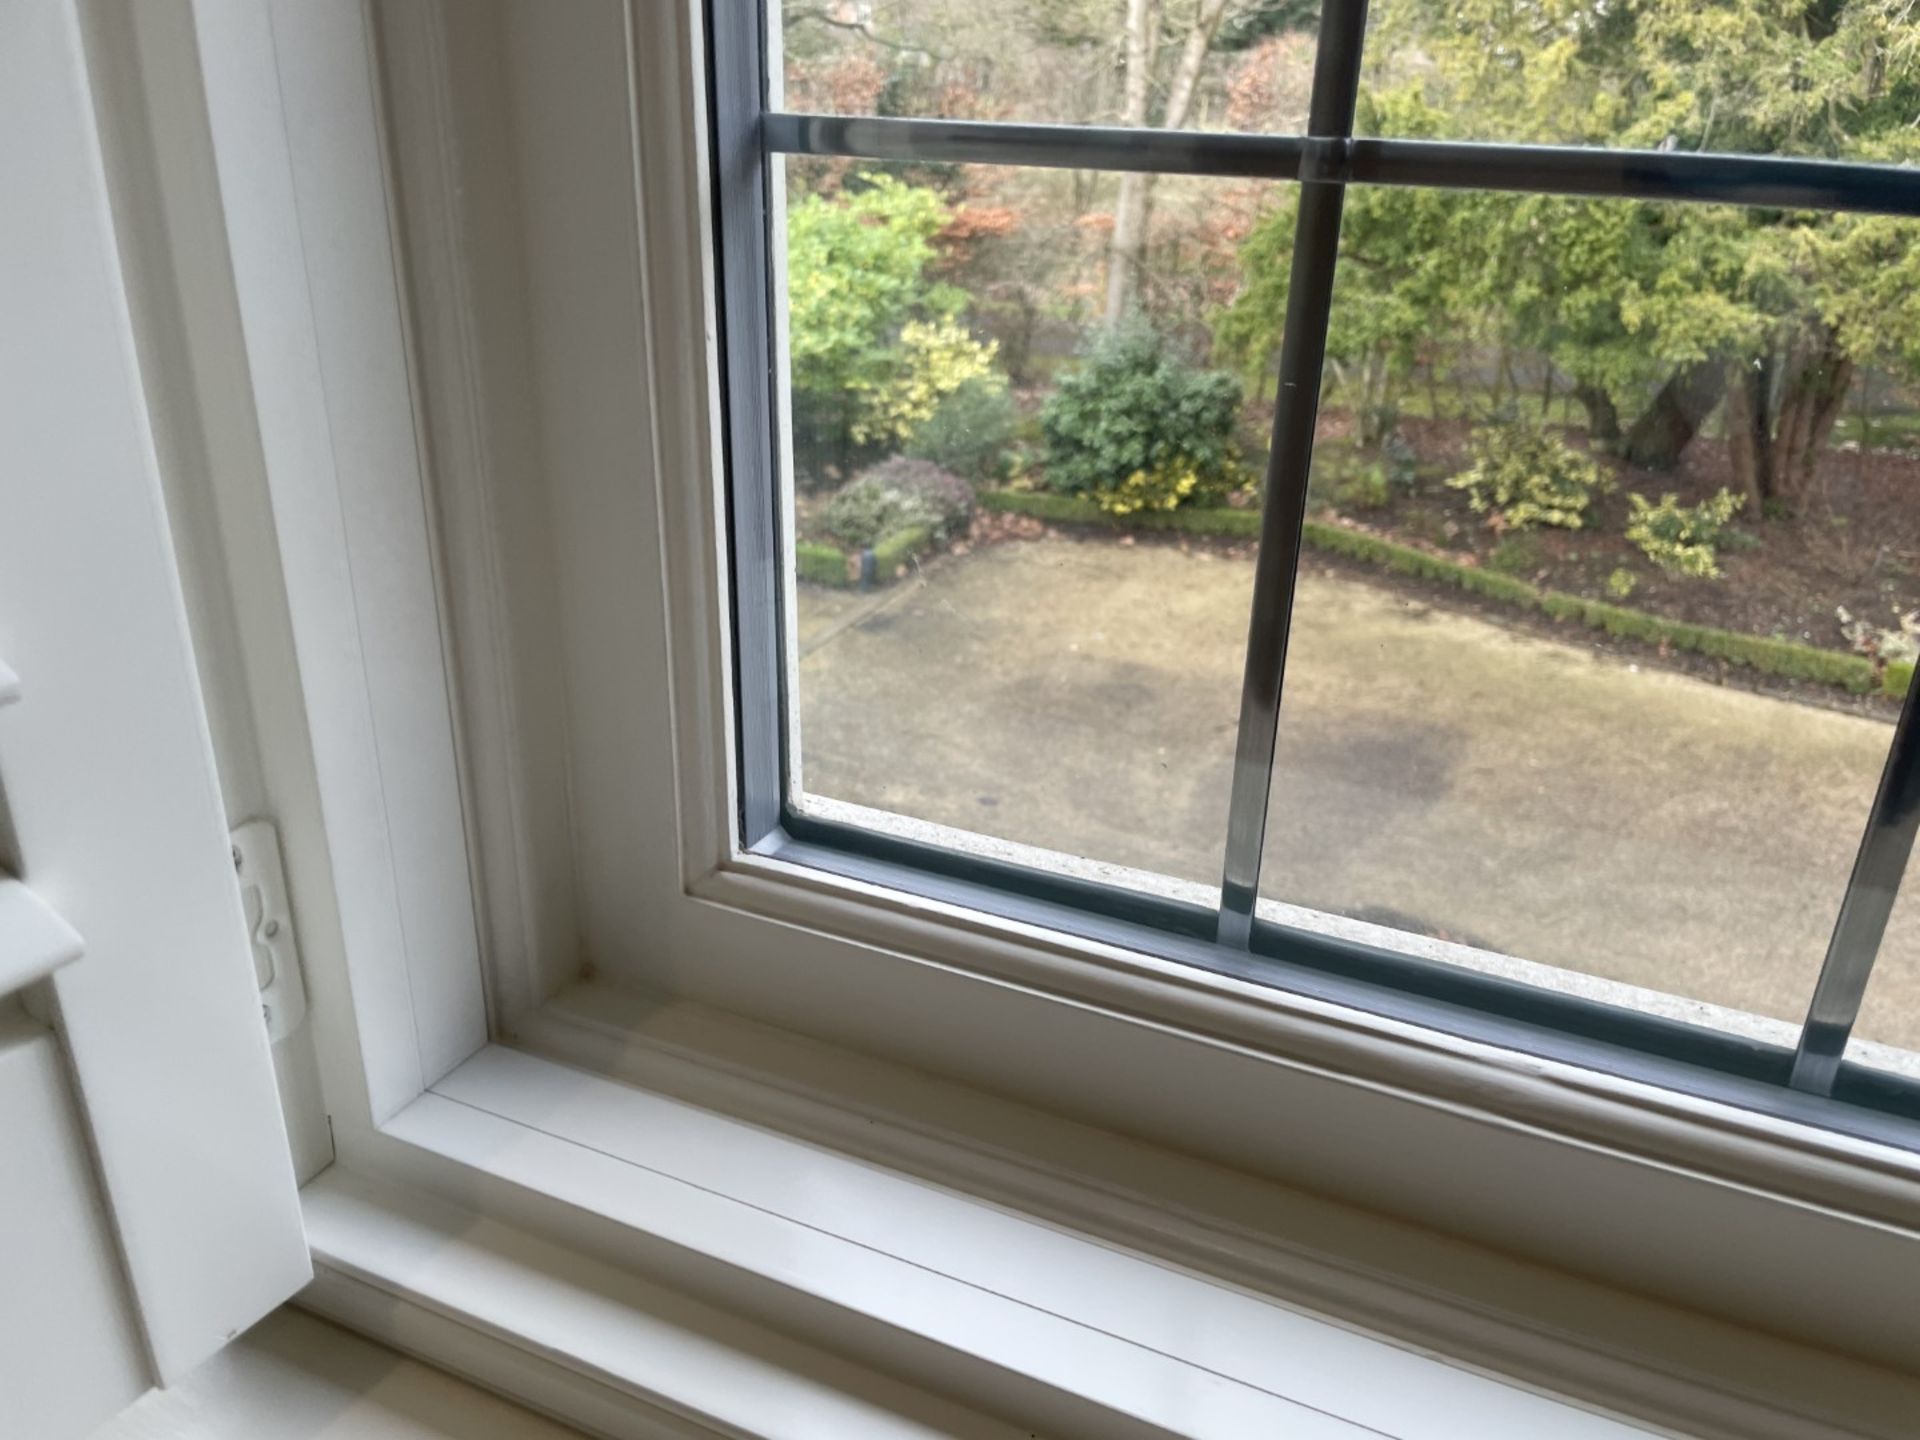 1 x Hardwood Timber Double Glazed Leaded 3-Pane Window Frame fitted with Shutter Blinds - Image 14 of 17